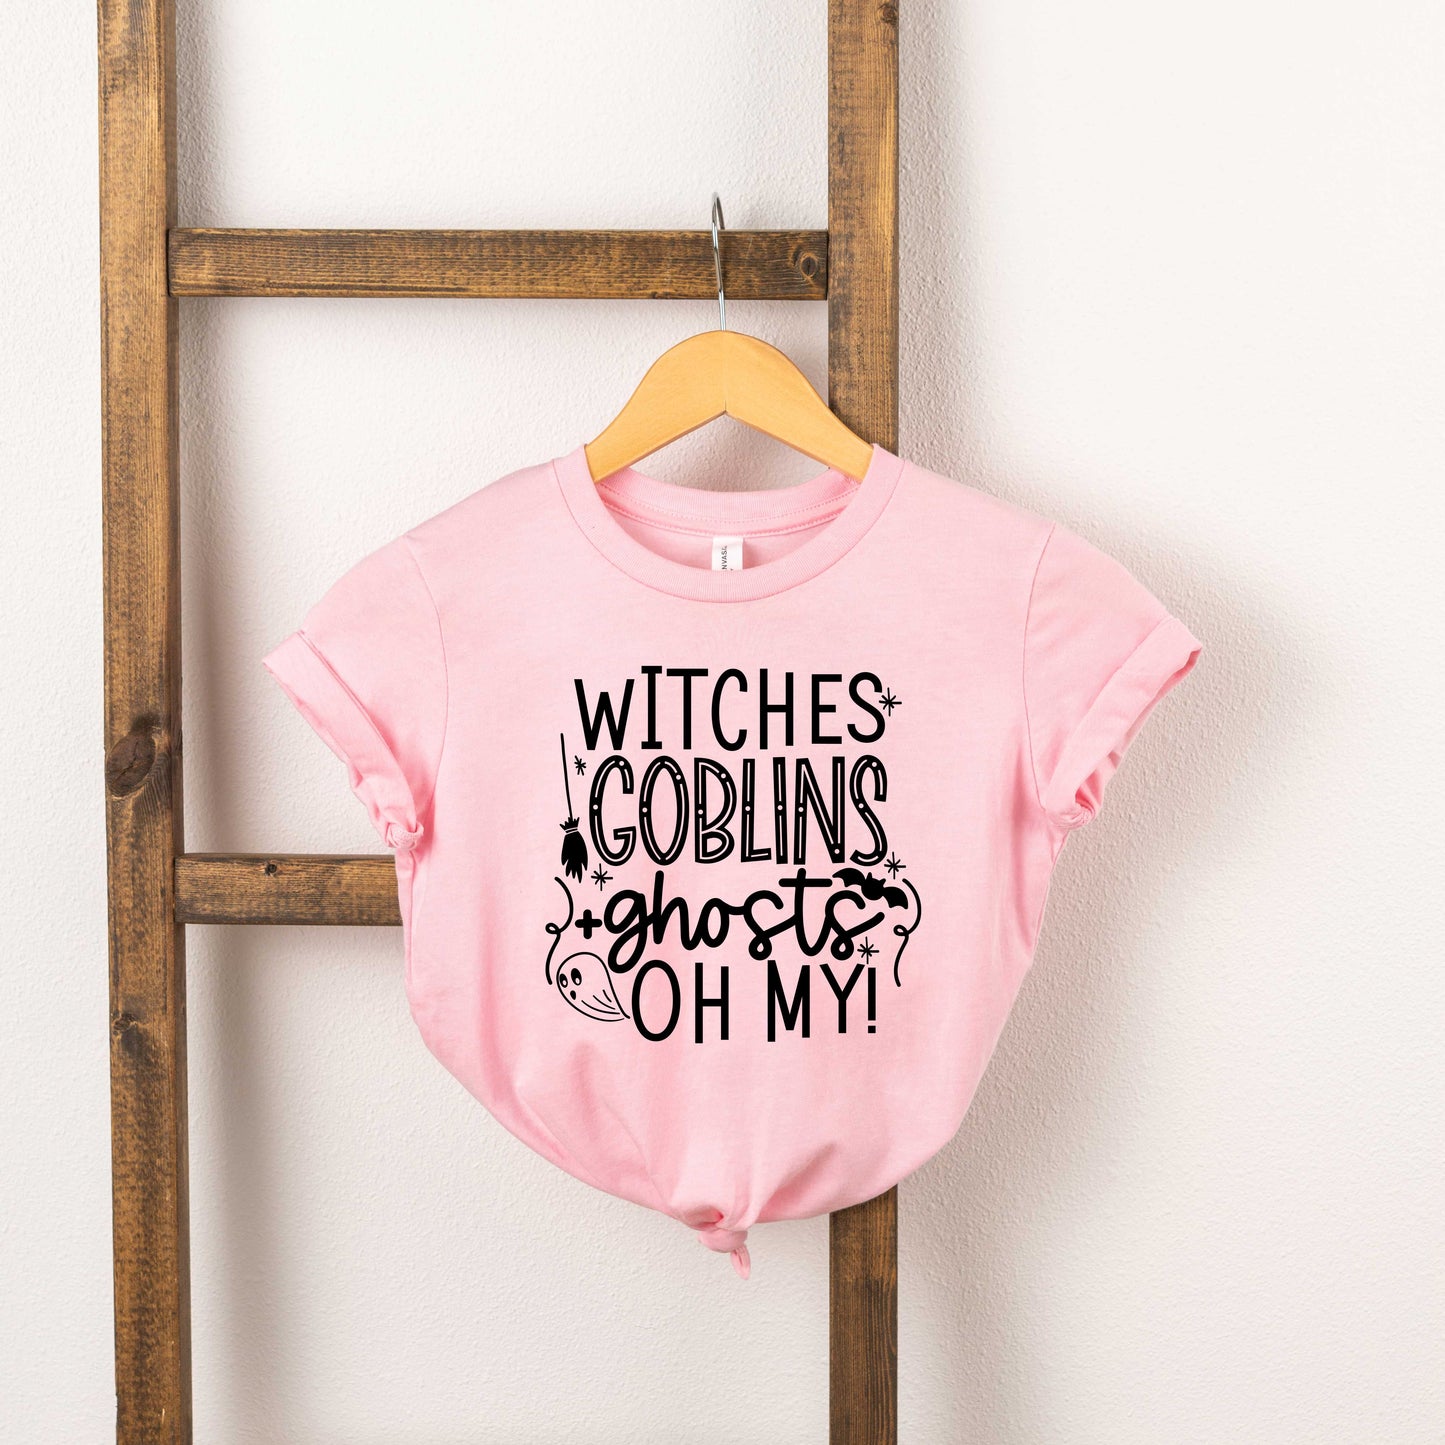 Witches Goblins Ghosts | Toddler Short Sleeve Crew Neck